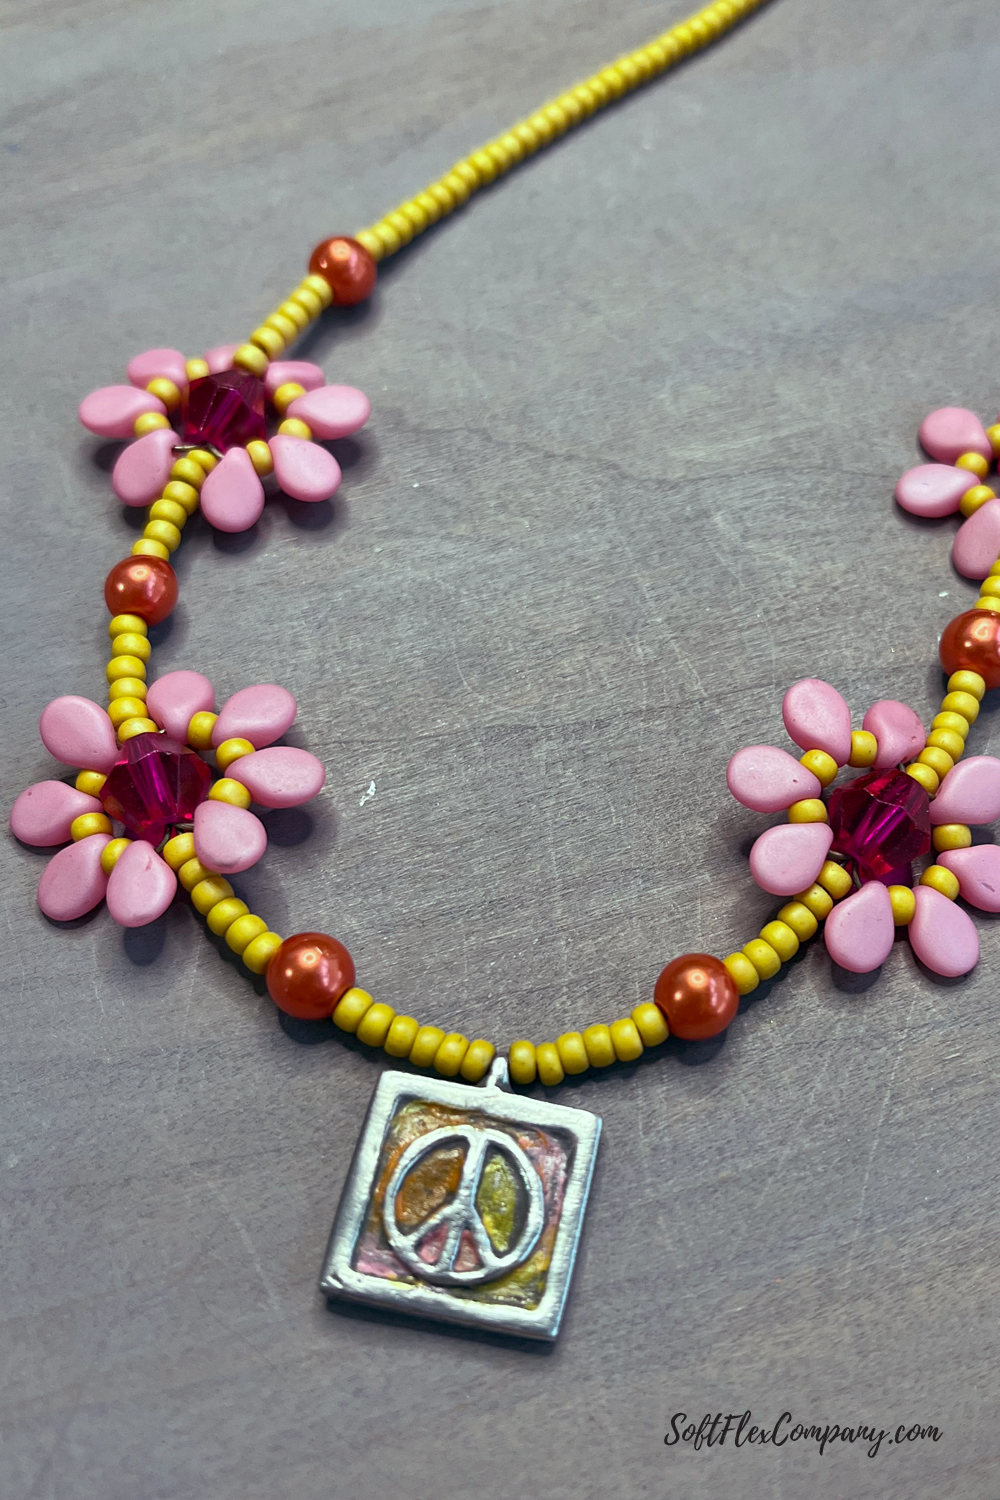 Daisy Chain Necklace by Kristen Fagan